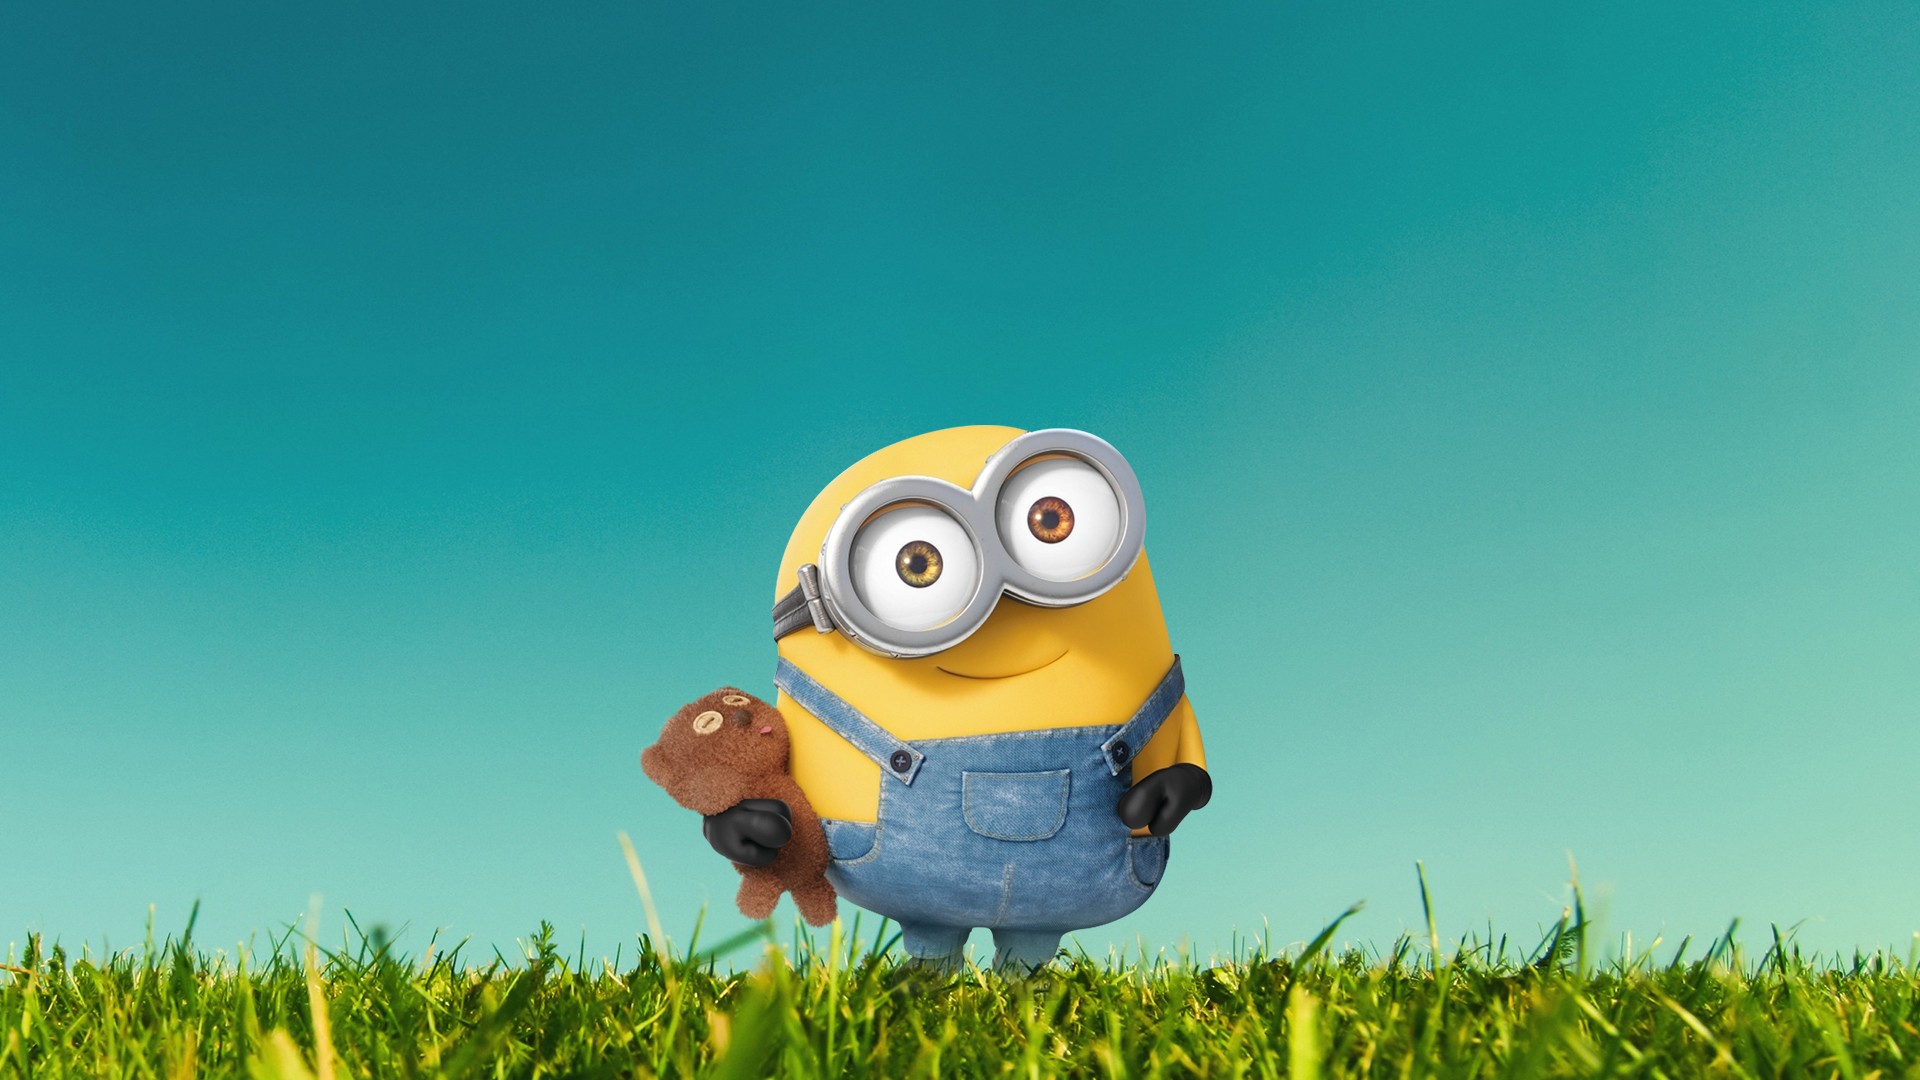 Minions Background HD Wallpapers 34932   Baltana